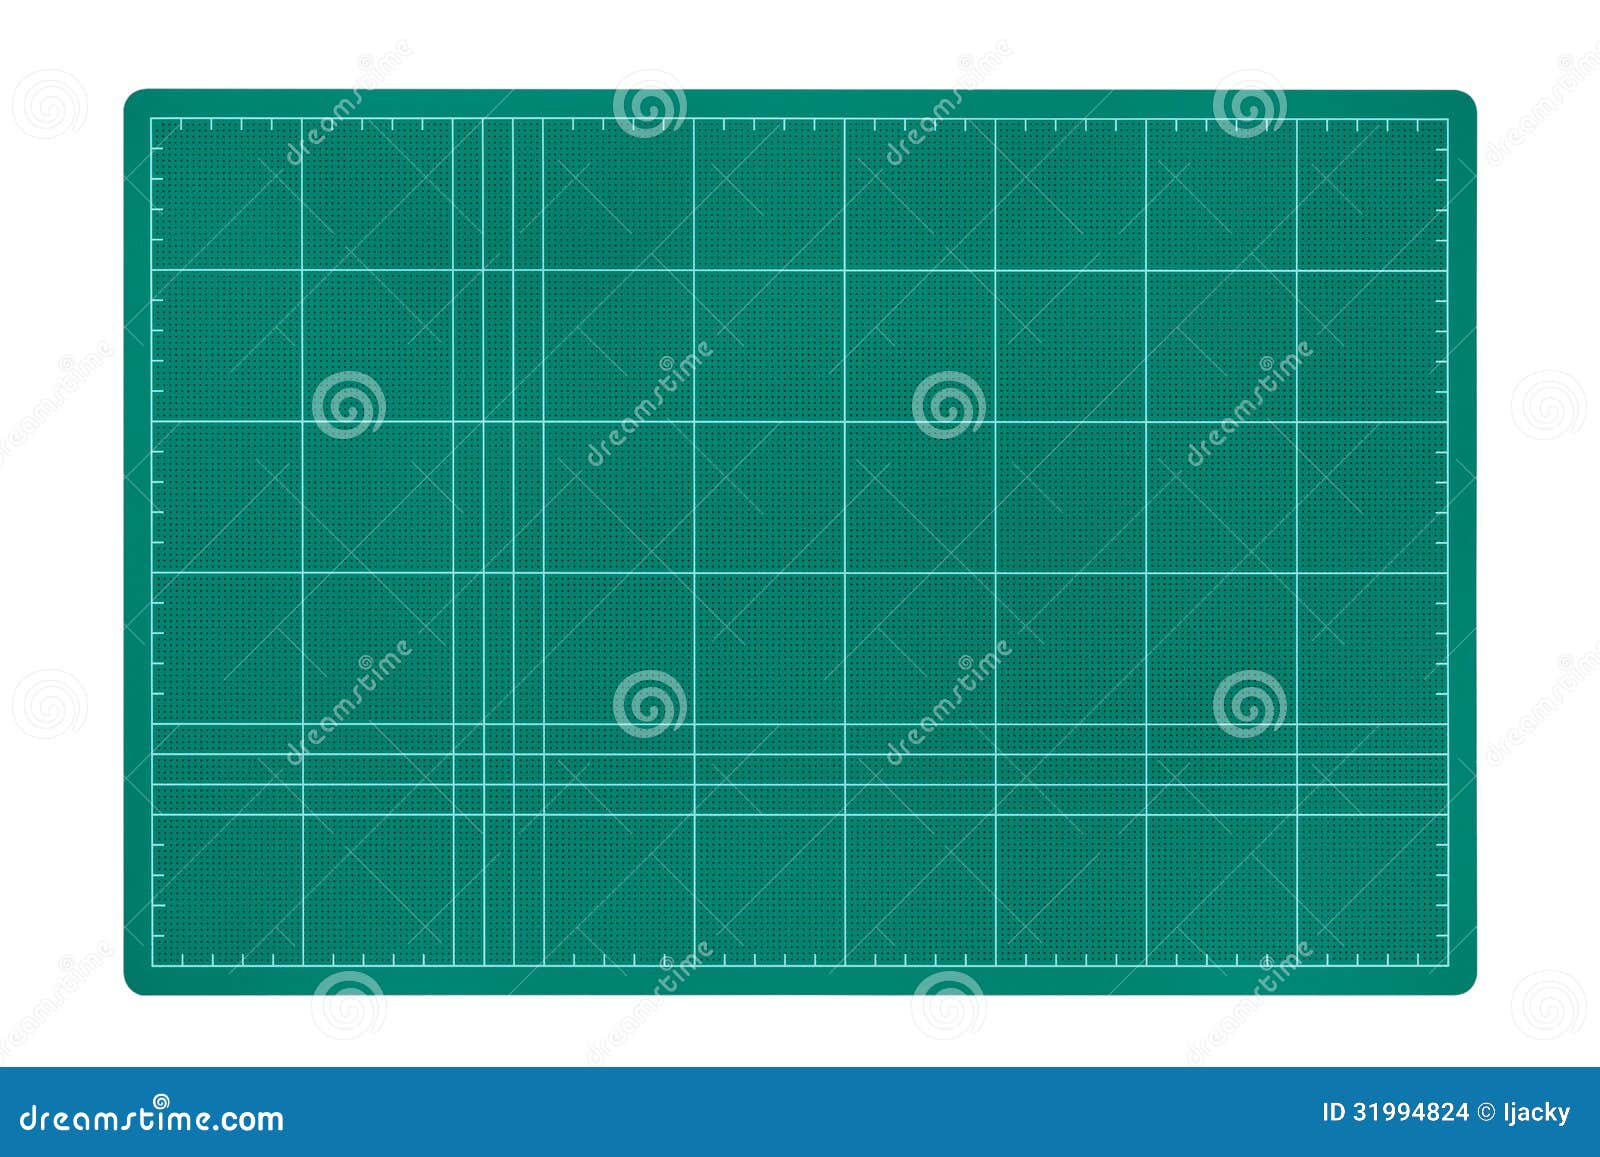 Cutting Mat Stock Photos, Images and Backgrounds for Free Download